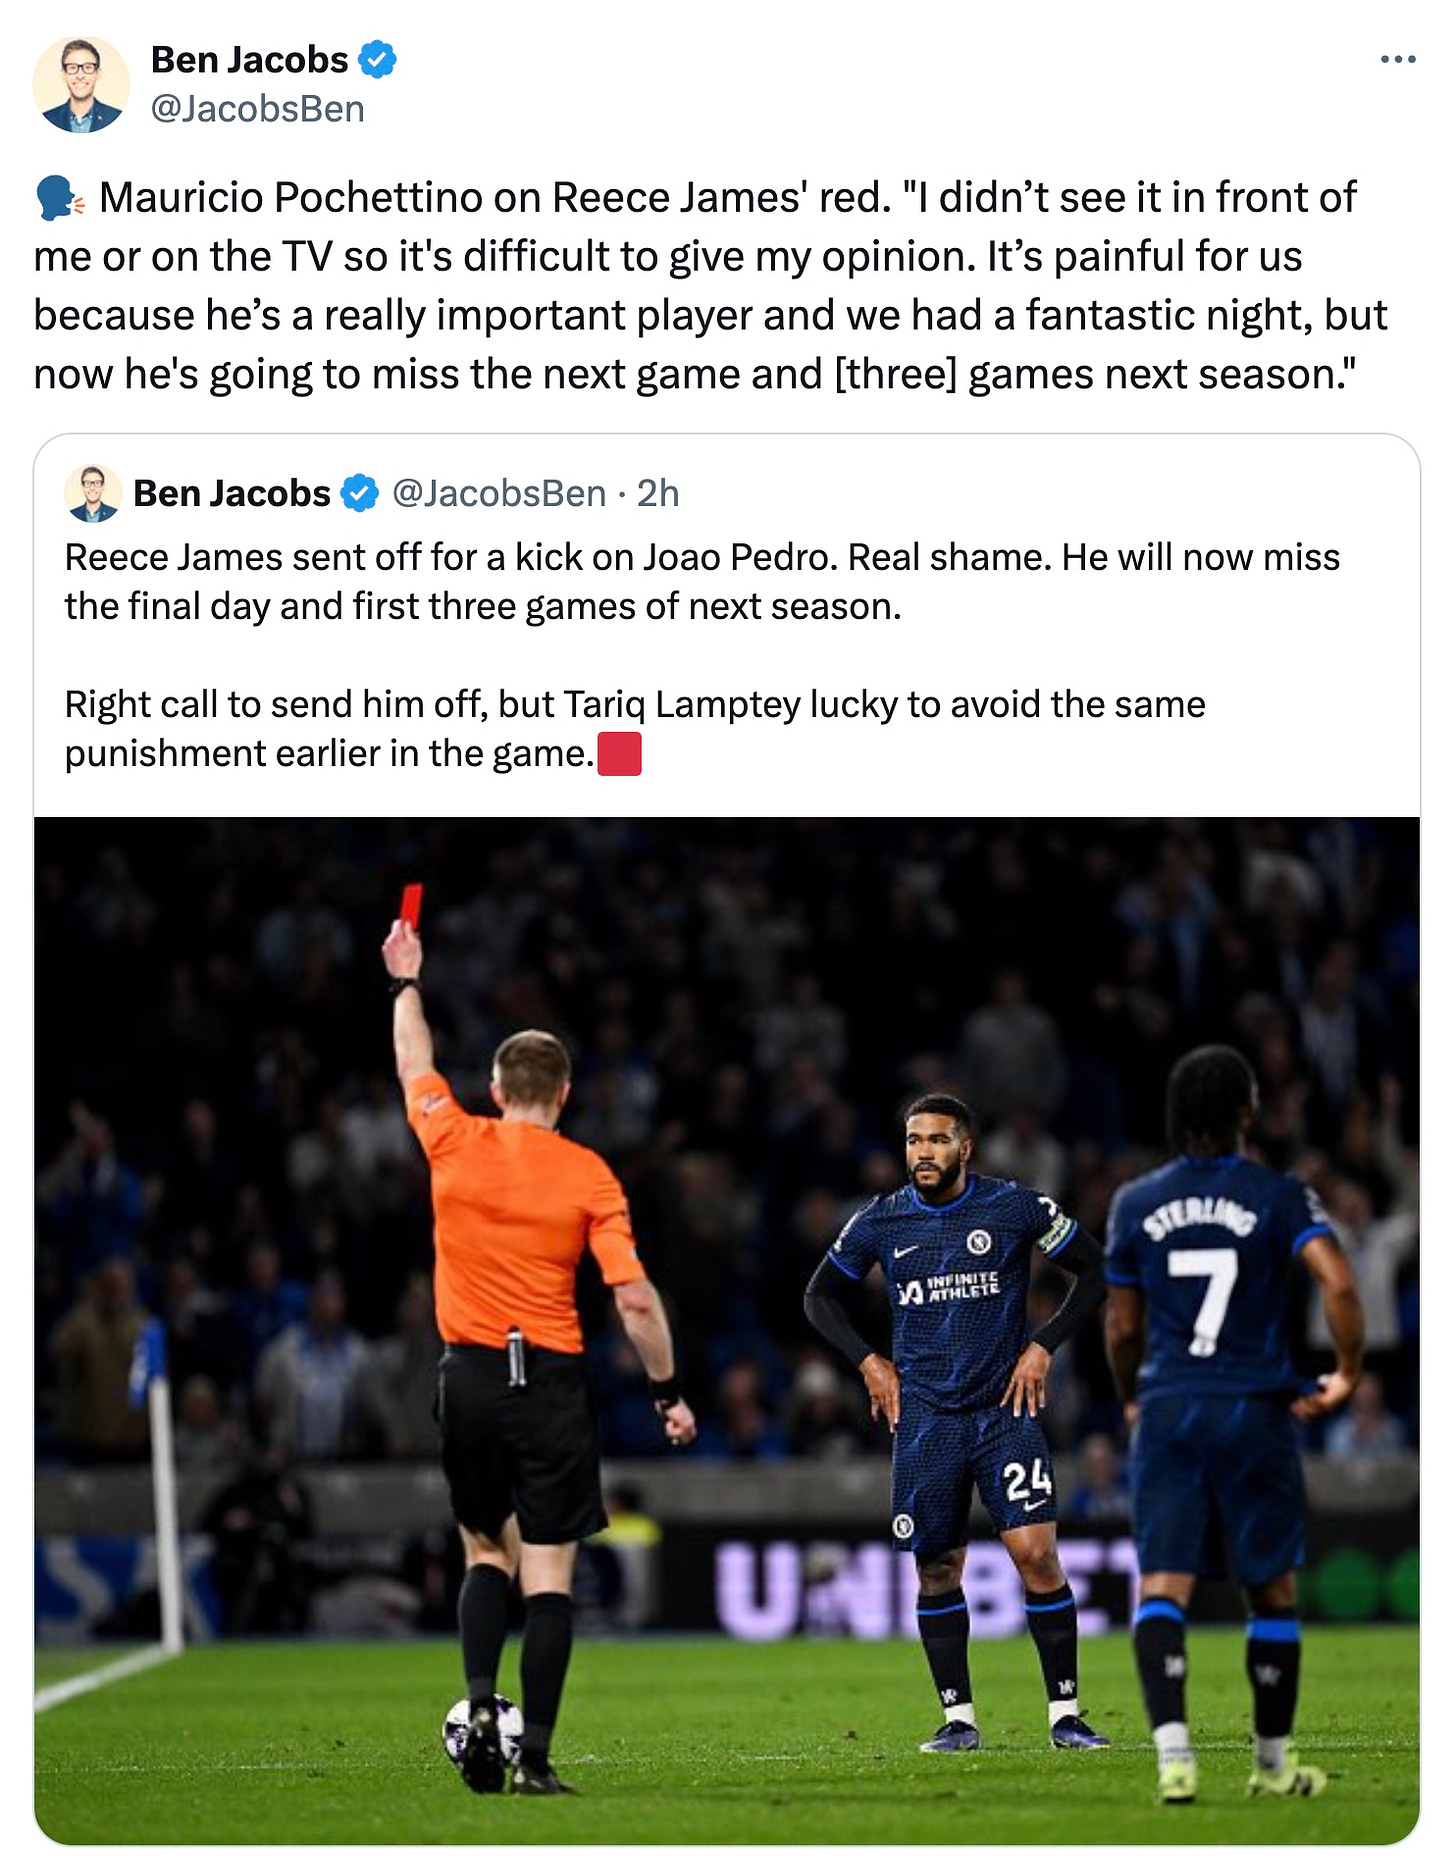 A tweet by Ben Jacobs about Reece James getting sent off against Brighton